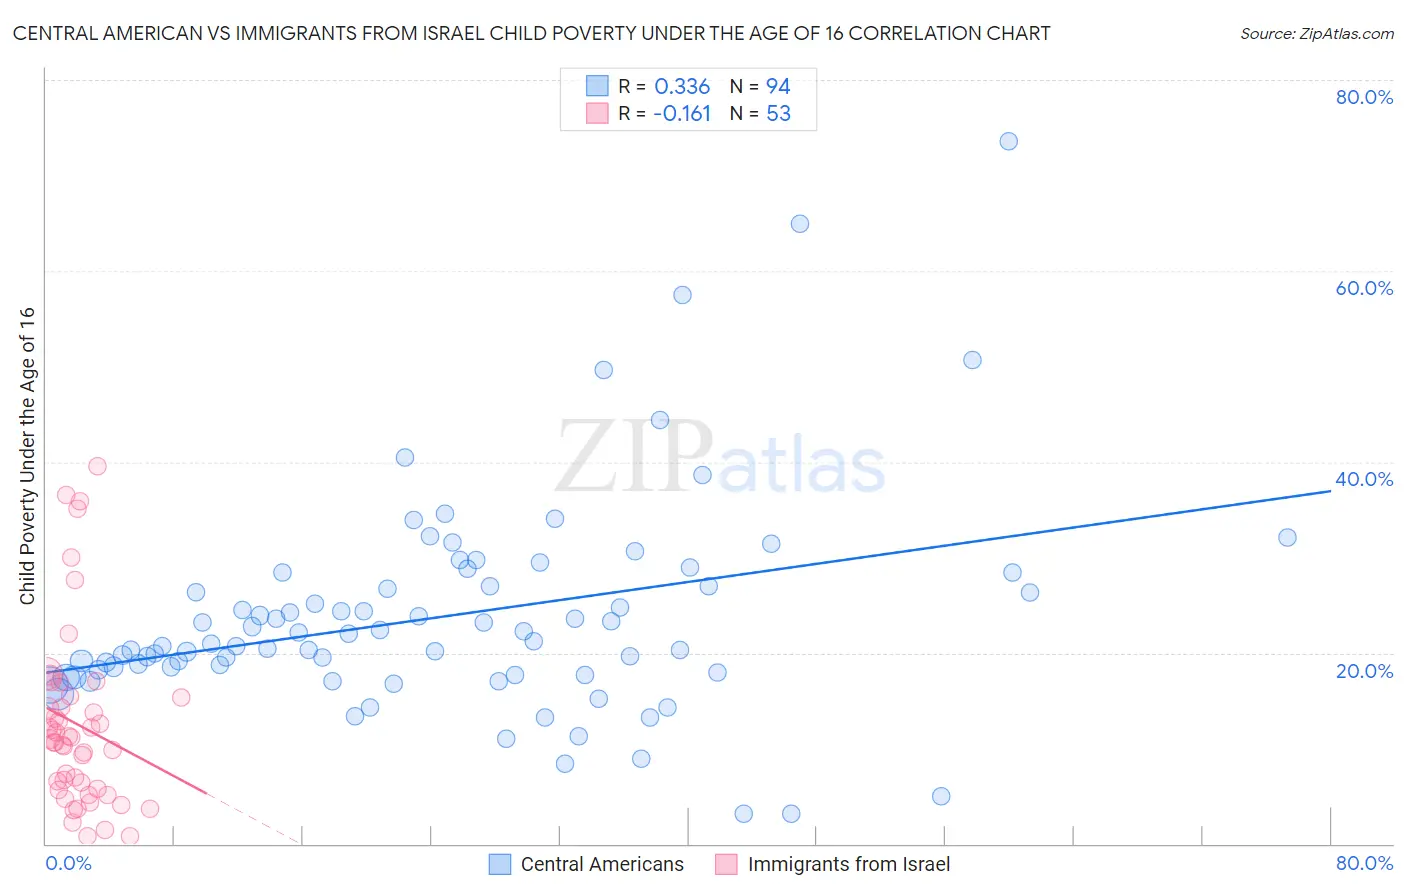 Central American vs Immigrants from Israel Child Poverty Under the Age of 16